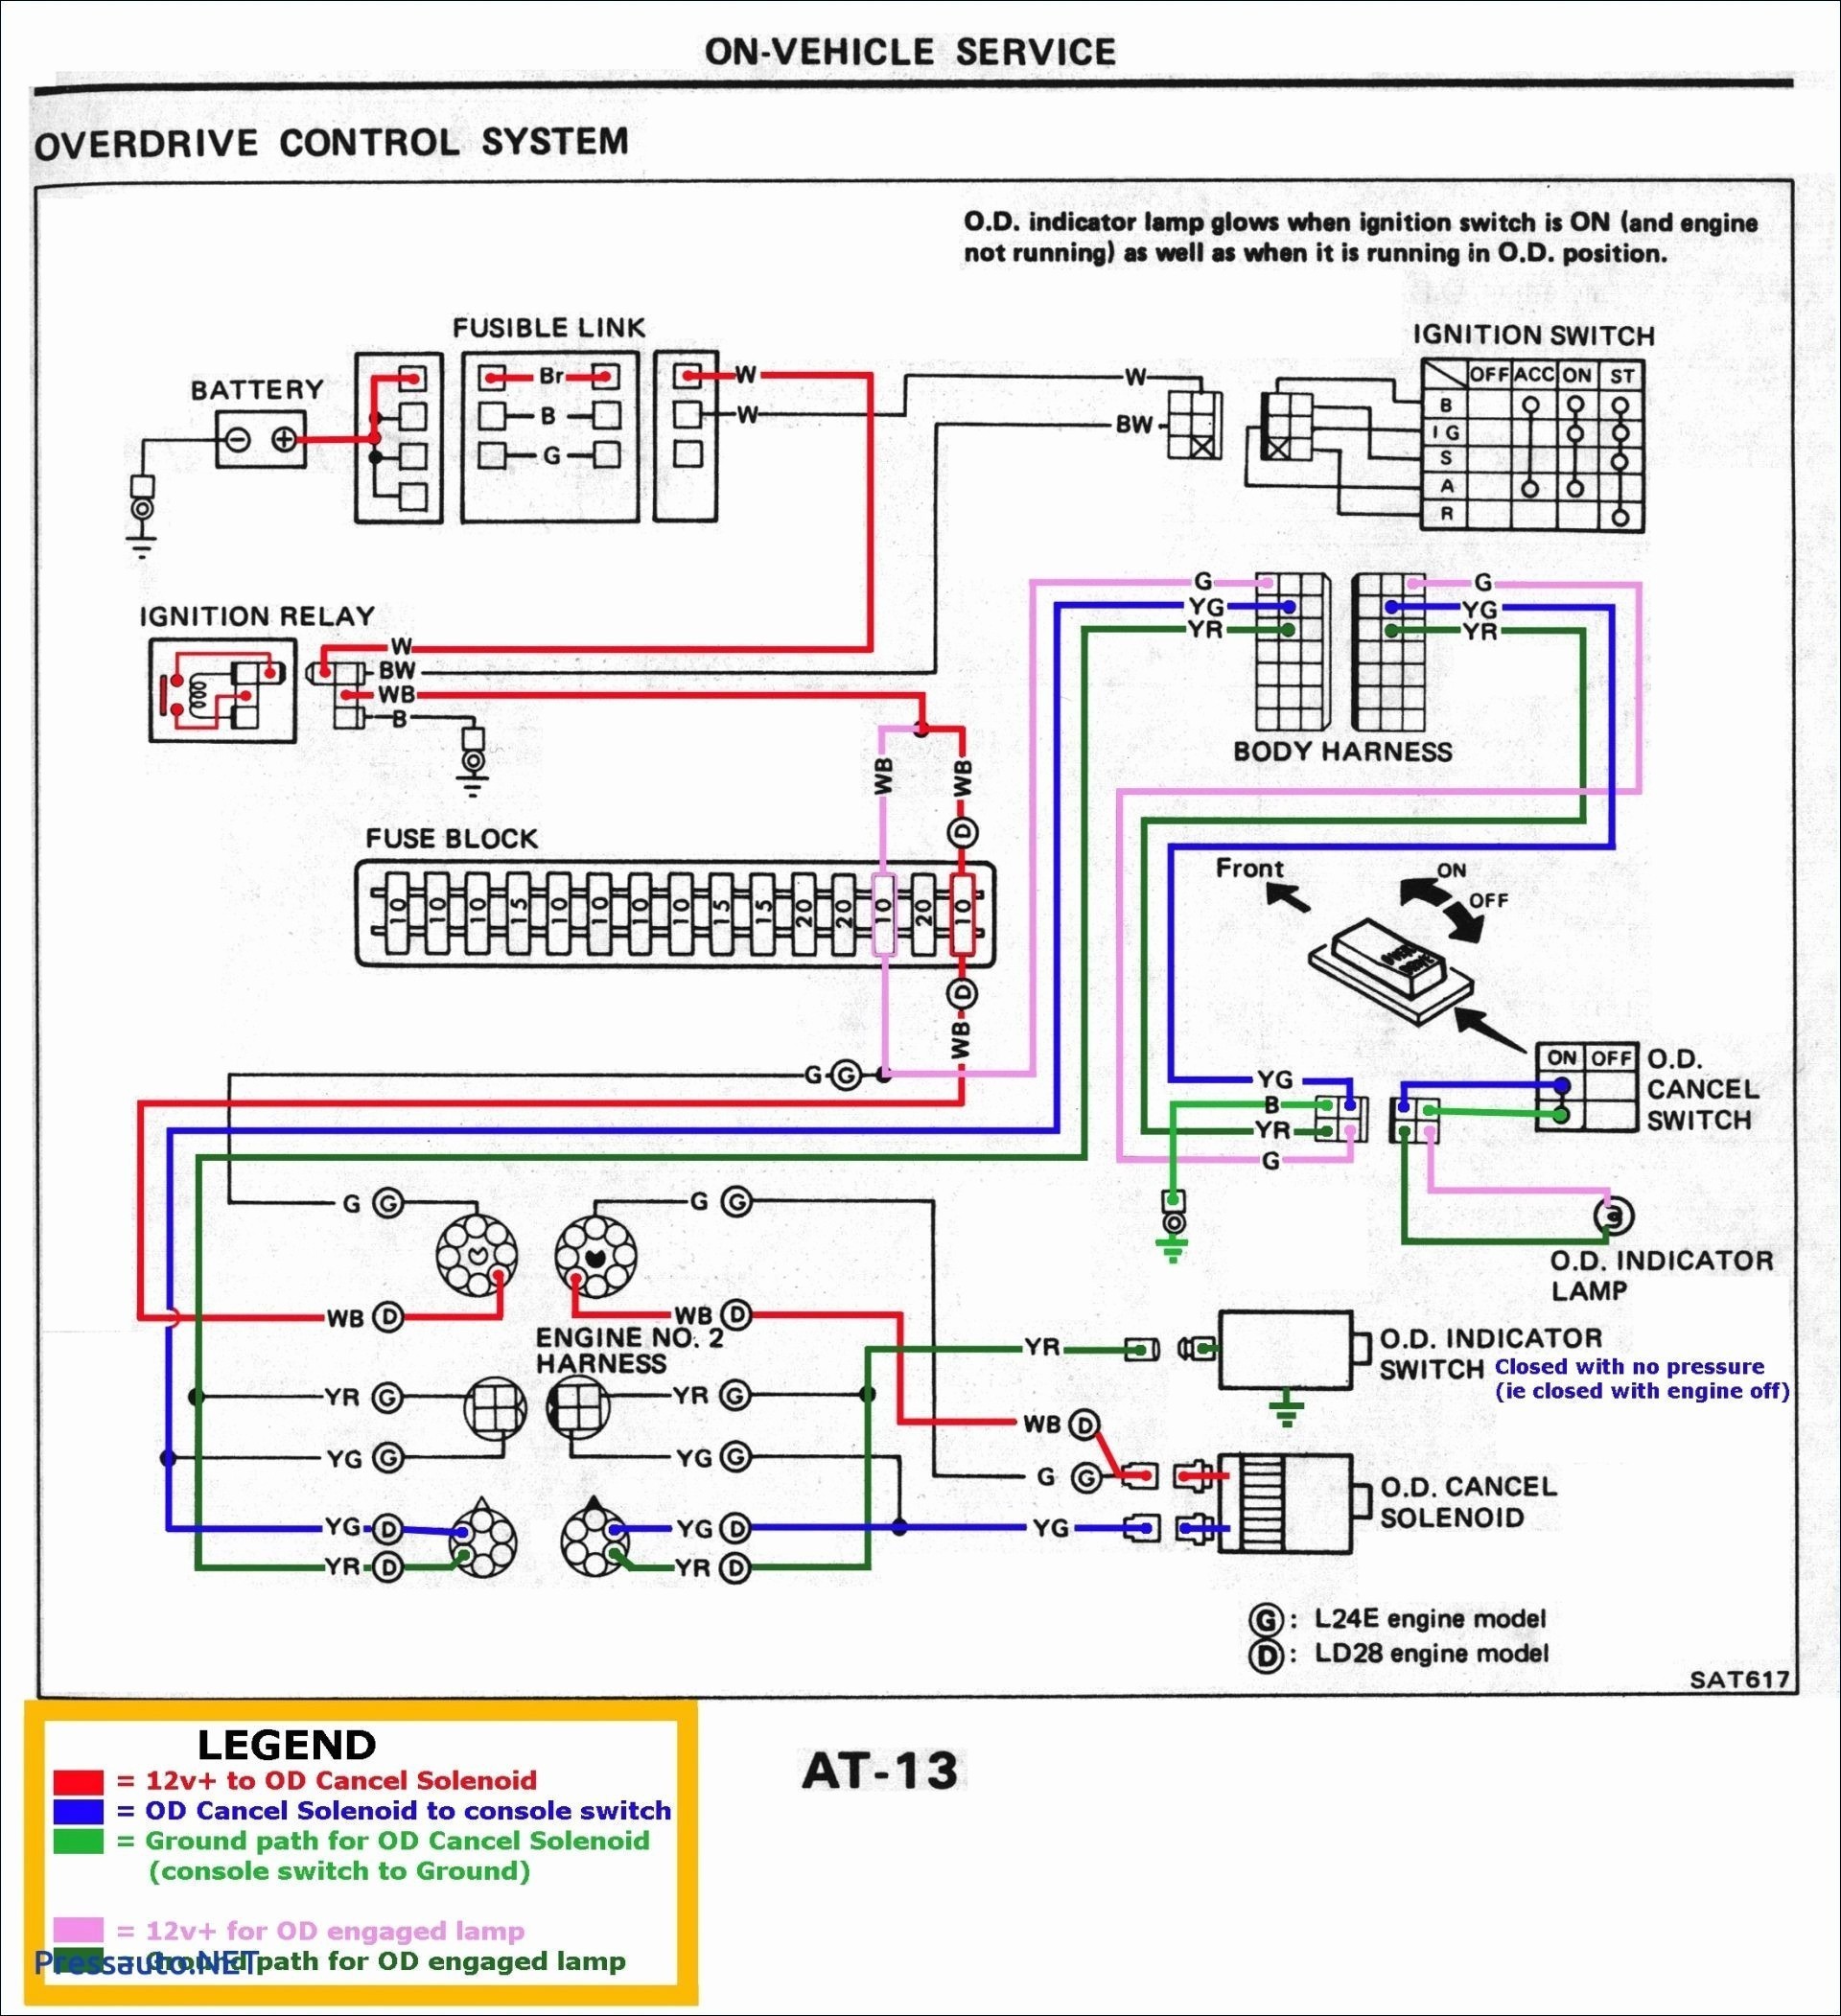 Dometic thermostat Wiring Diagram Rv Furnace thermostat Wiring Diagram Worksheet and Wiring Diagram • Of Dometic thermostat Wiring Diagram